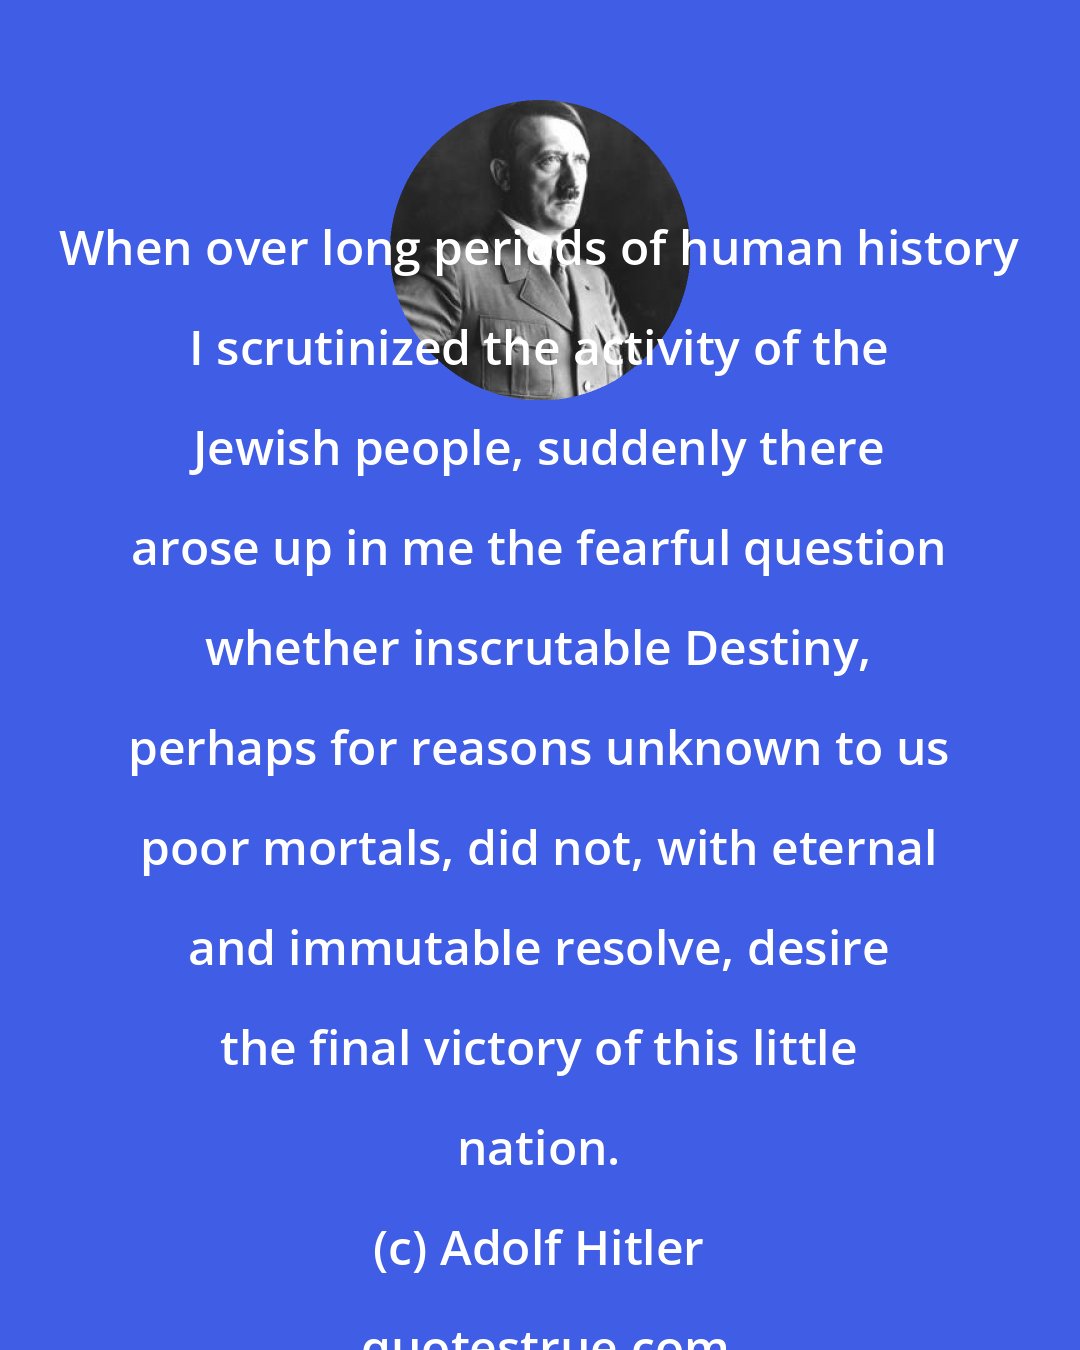 Adolf Hitler: When over long periods of human history I scrutinized the activity of the Jewish people, suddenly there arose up in me the fearful question whether inscrutable Destiny, perhaps for reasons unknown to us poor mortals, did not, with eternal and immutable resolve, desire the final victory of this little nation.